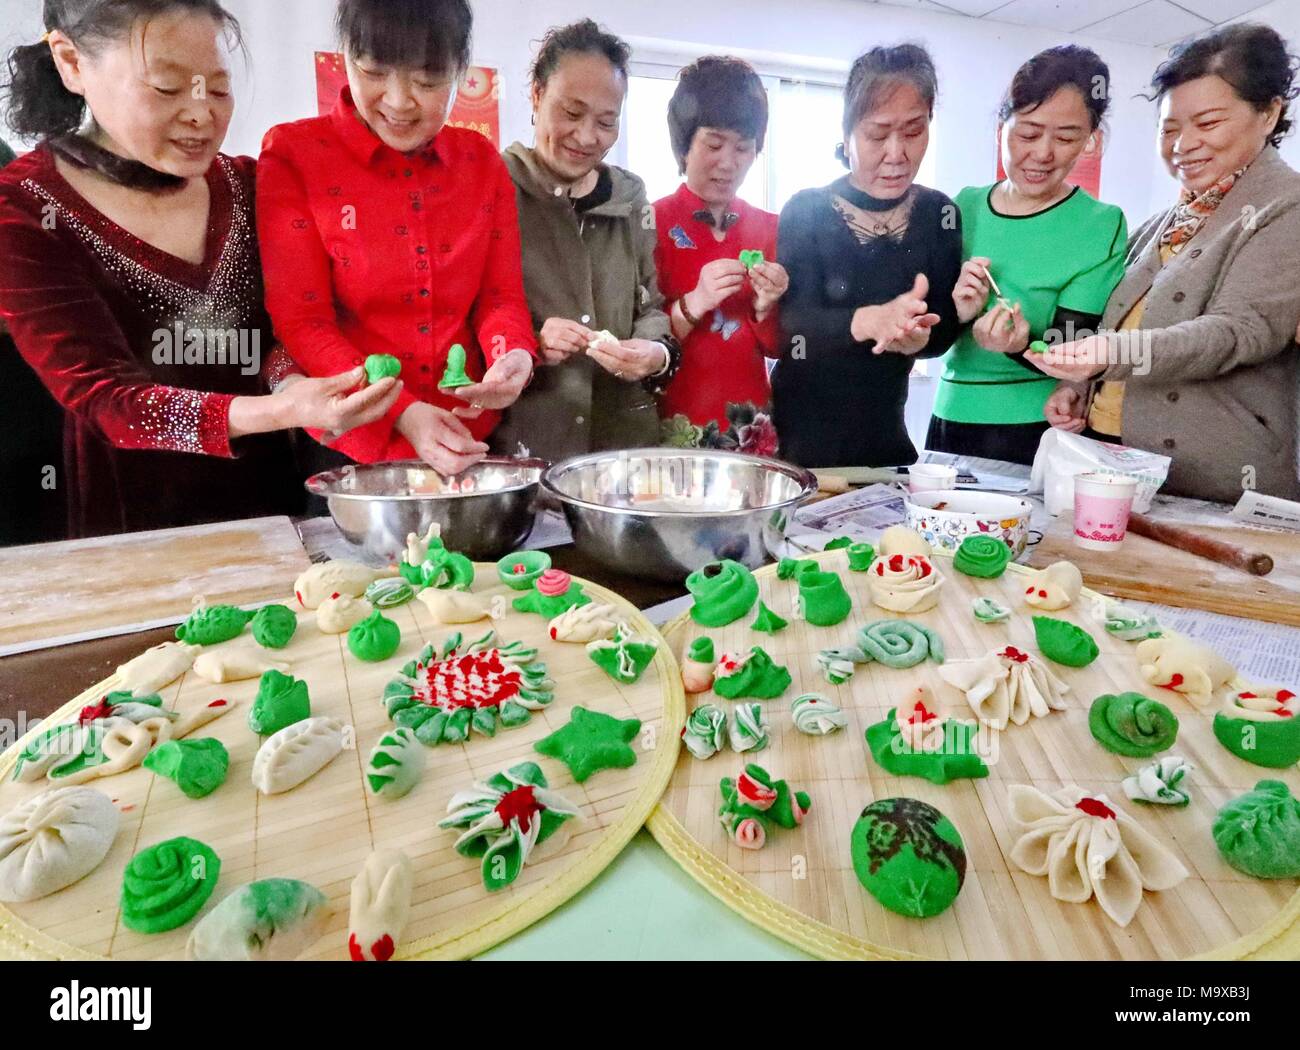 Qinhuangdao, Qinhuangdao, China. 29th Mar, 2018. Qinhuangdao, CHINA-29th March 2018: People make traditional food to celebrate Cold Food Festival in Qinhuangdao, north China's Hebei Province. The Cold Food or Hanshi Festival is a traditional Chinese holiday which developed from the local commemoration of the death of the Jin nobleman Jie Zhitui in the 7th century BC under the Zhou into an East Asian occasion for the commemoration and veneration of ancestors by the 7th-century Tang. The lighting of fire was avoided, even for the preparation of food. This practice originally occurred at midwint Stock Photo